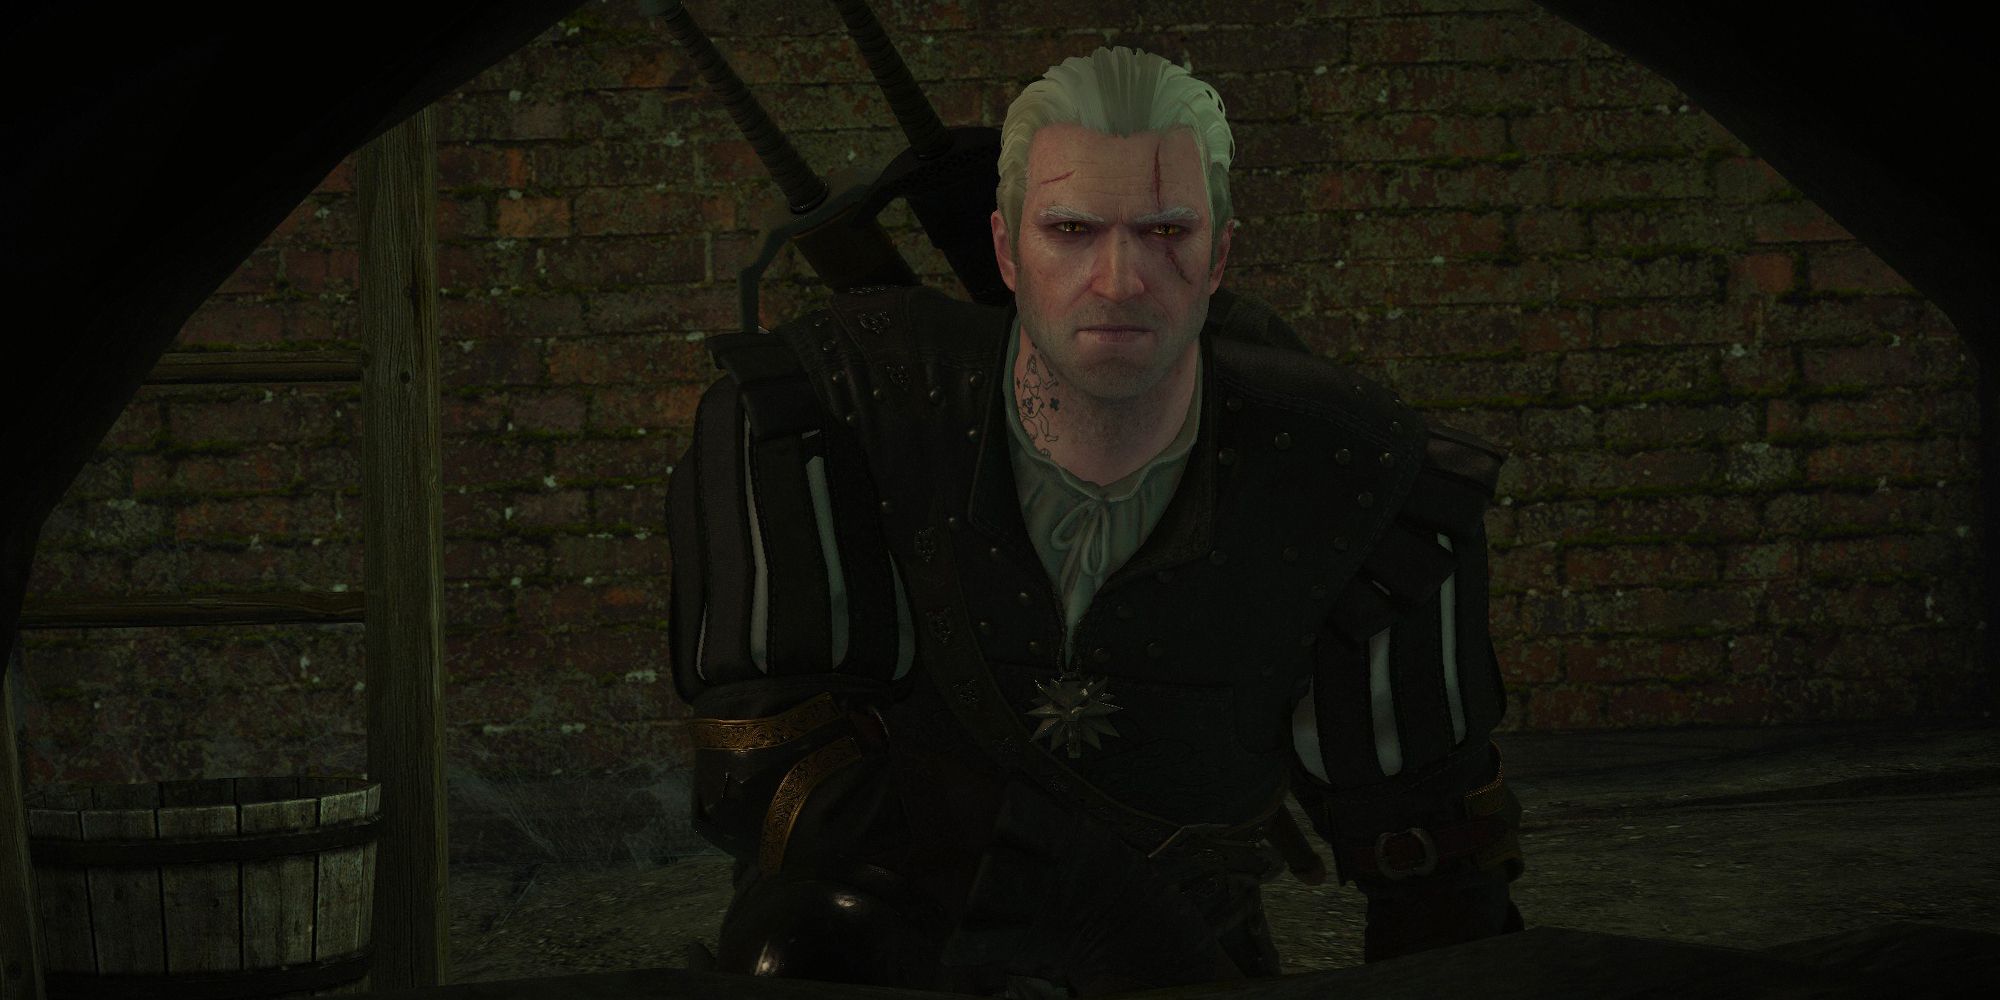 The Witcher 3 Geralt kneeling next to a furnace.